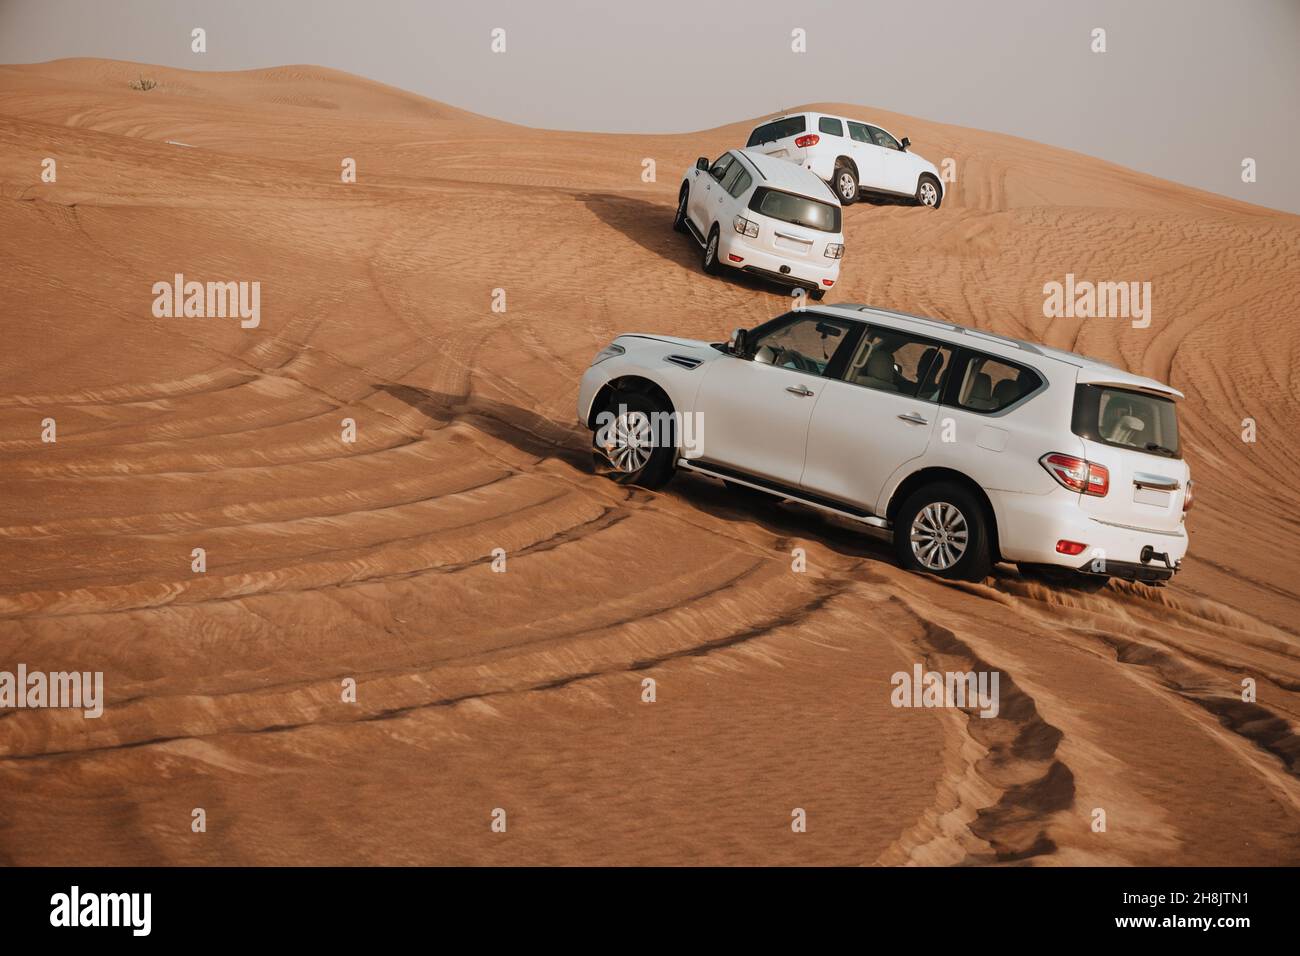 Race in sand desert. Competition racing challenge desert. Car drives offroad with clouds of dust. Offroad vehicle racing with obstacles in wilderness Stock Photo